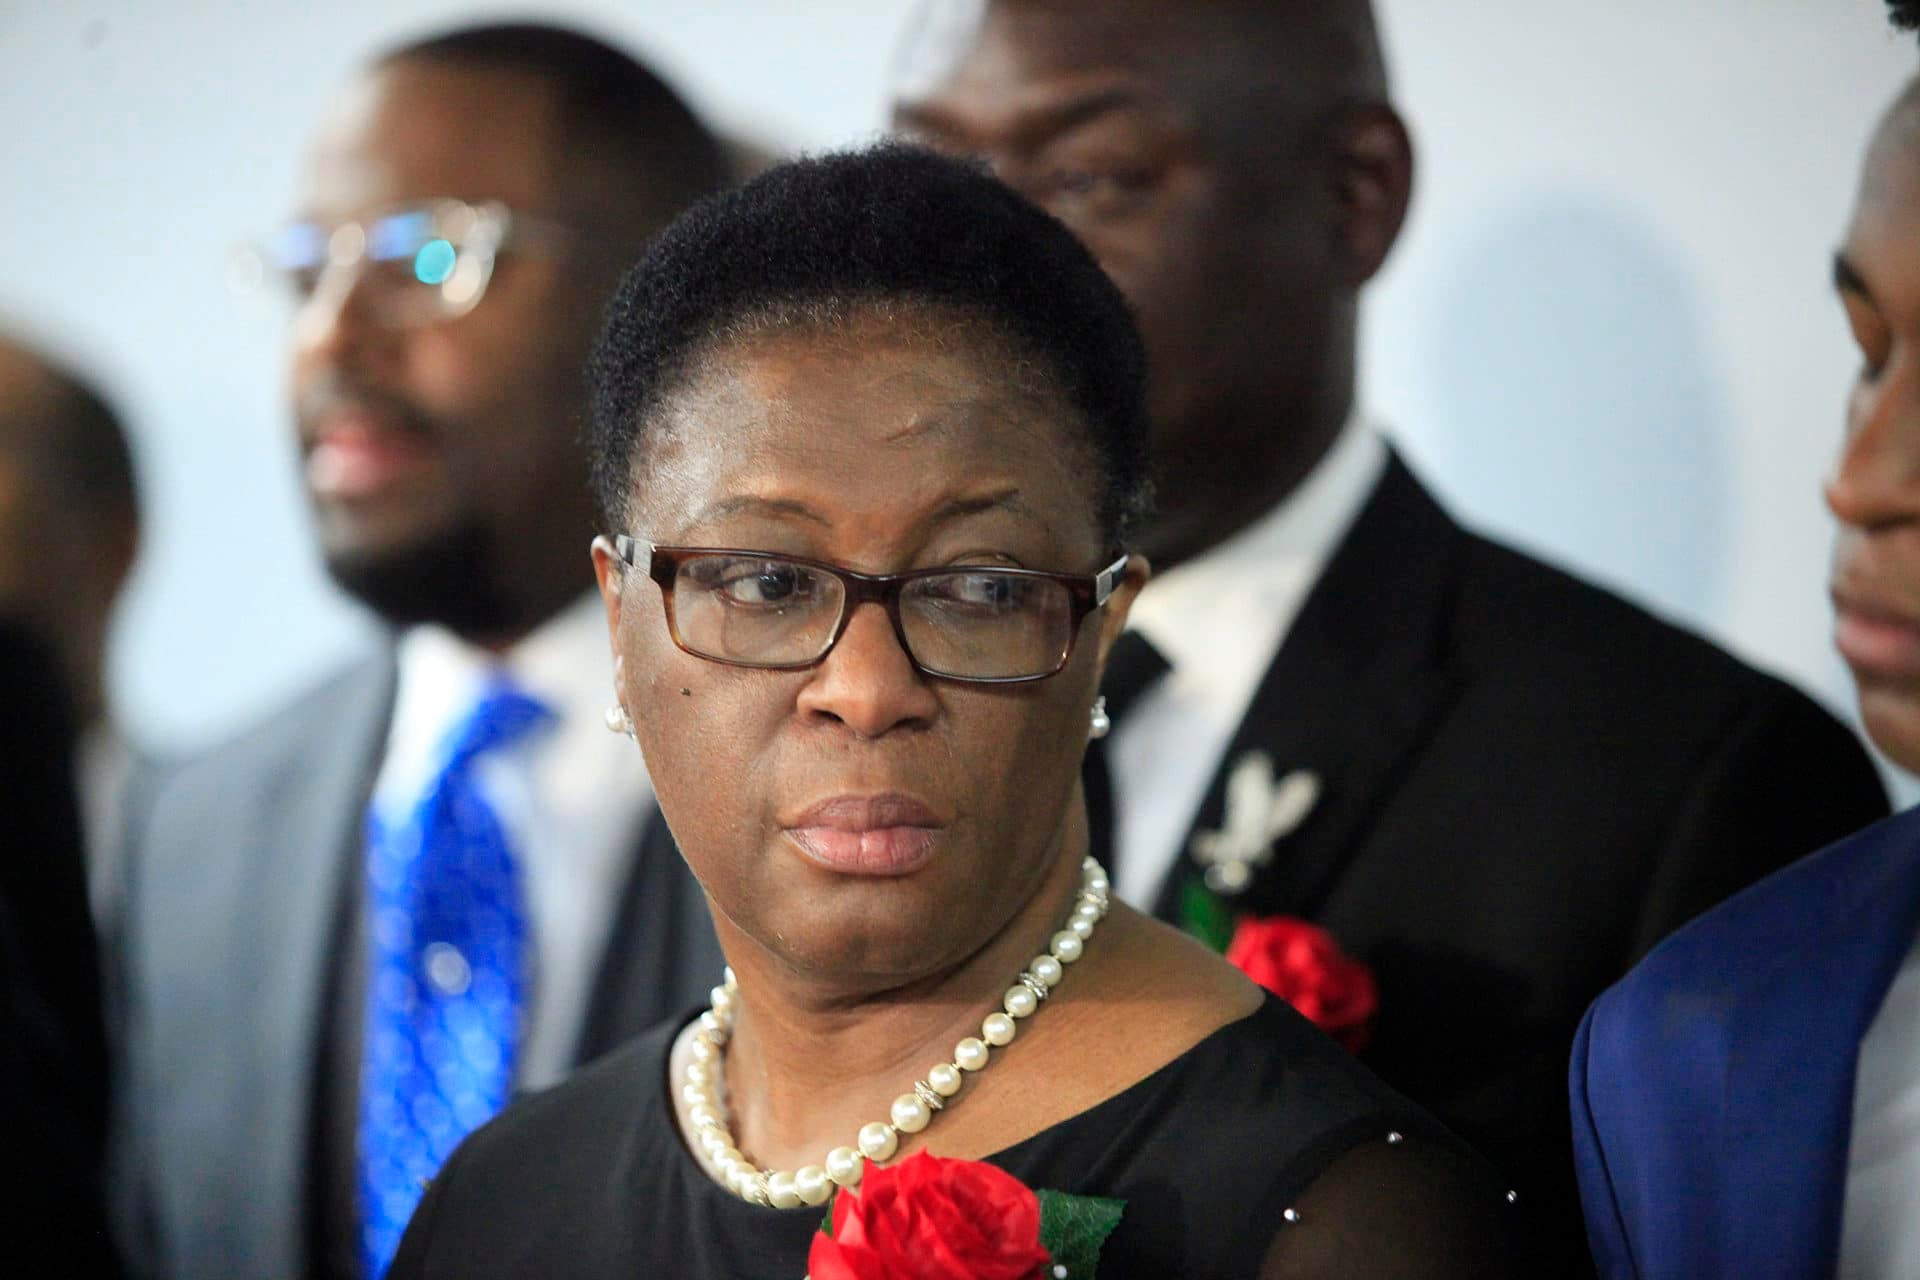 Botham Jean's Parents Meet With District Attorney To Get More Answers About His Killing